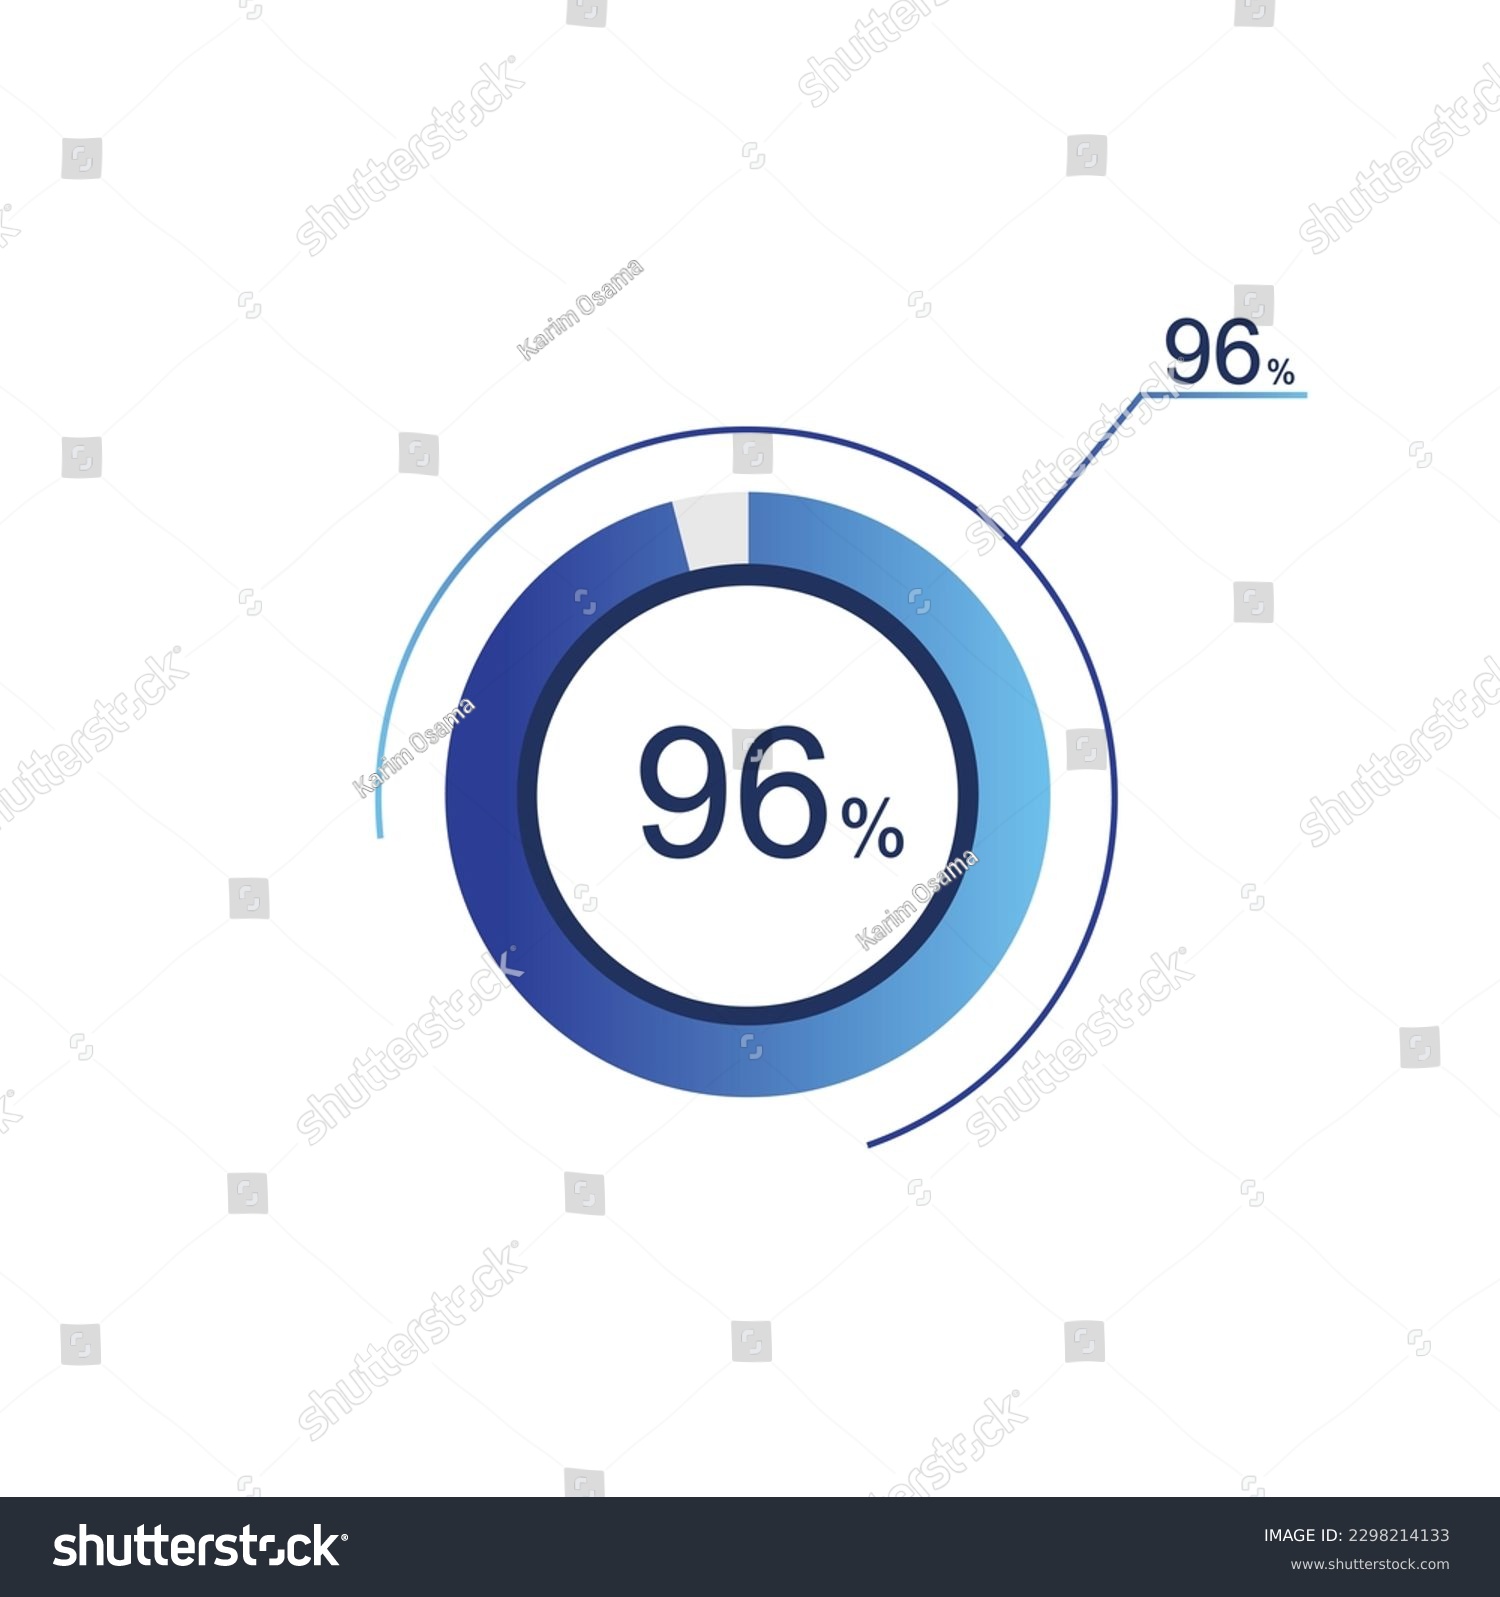 SVG of 96% percentage infographic circle icons, 96 percents pie chart infographic elements for Illustration, business, web design. svg